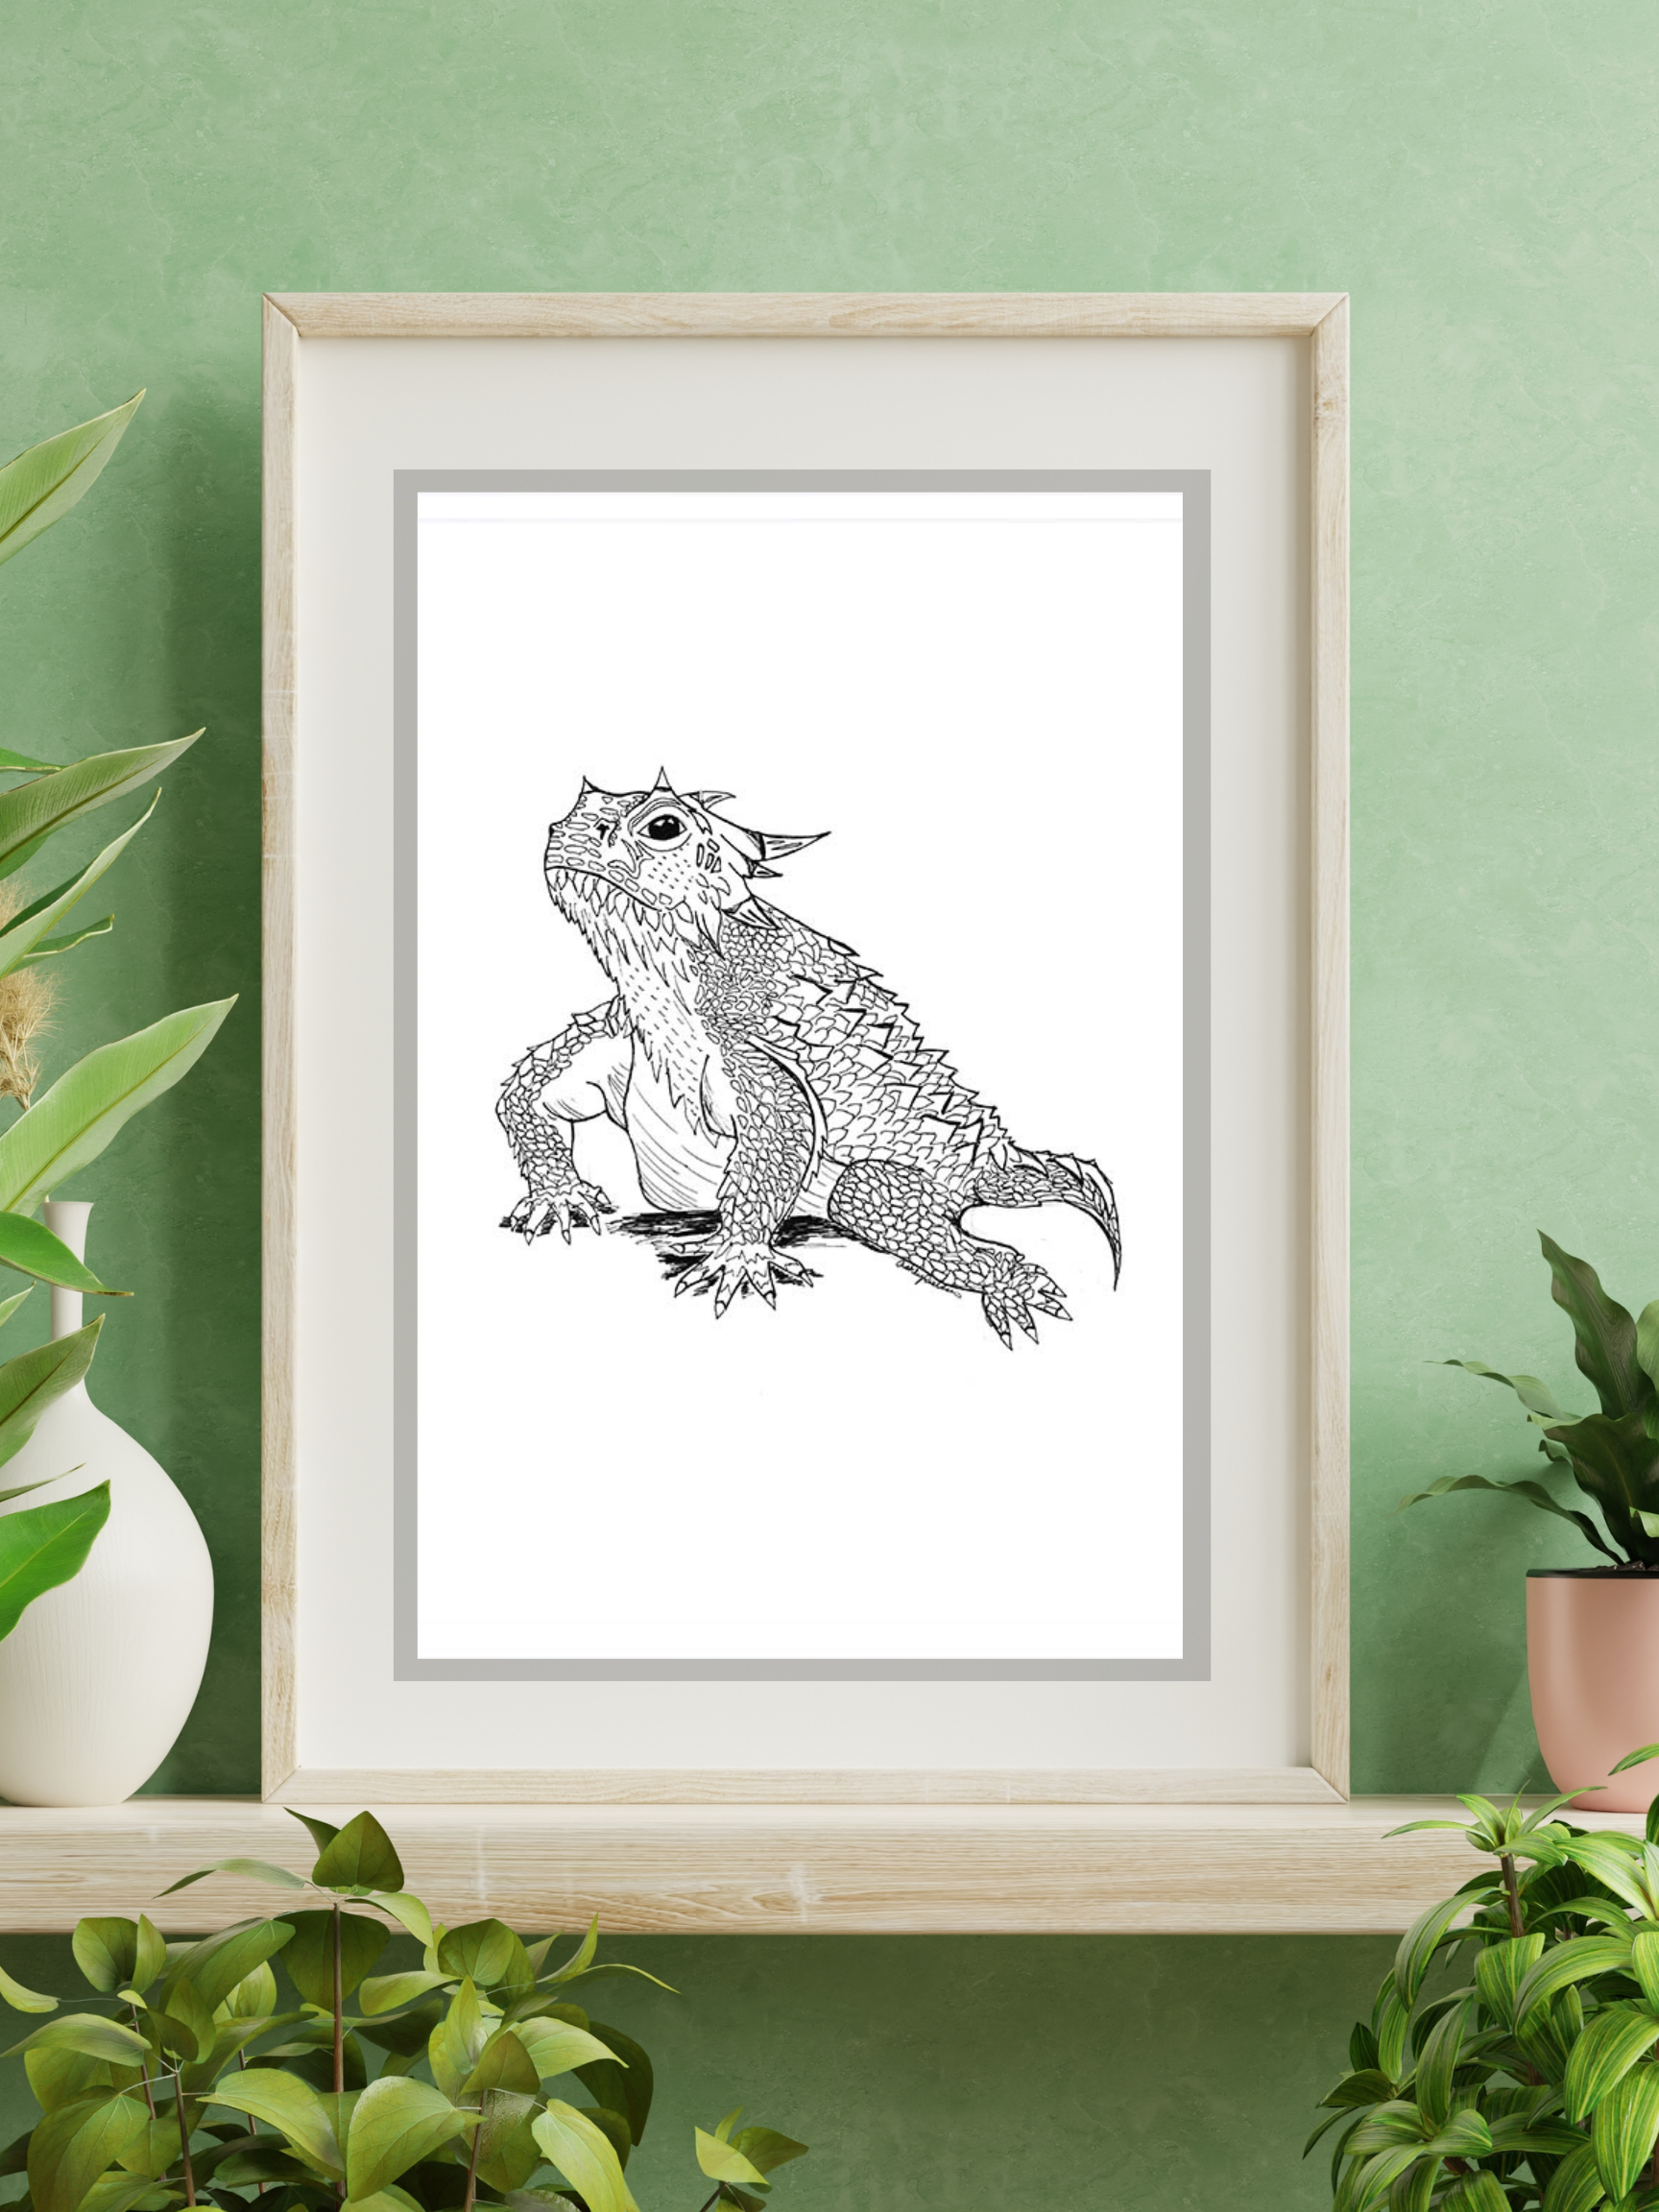 horned toad art print in frame on wall